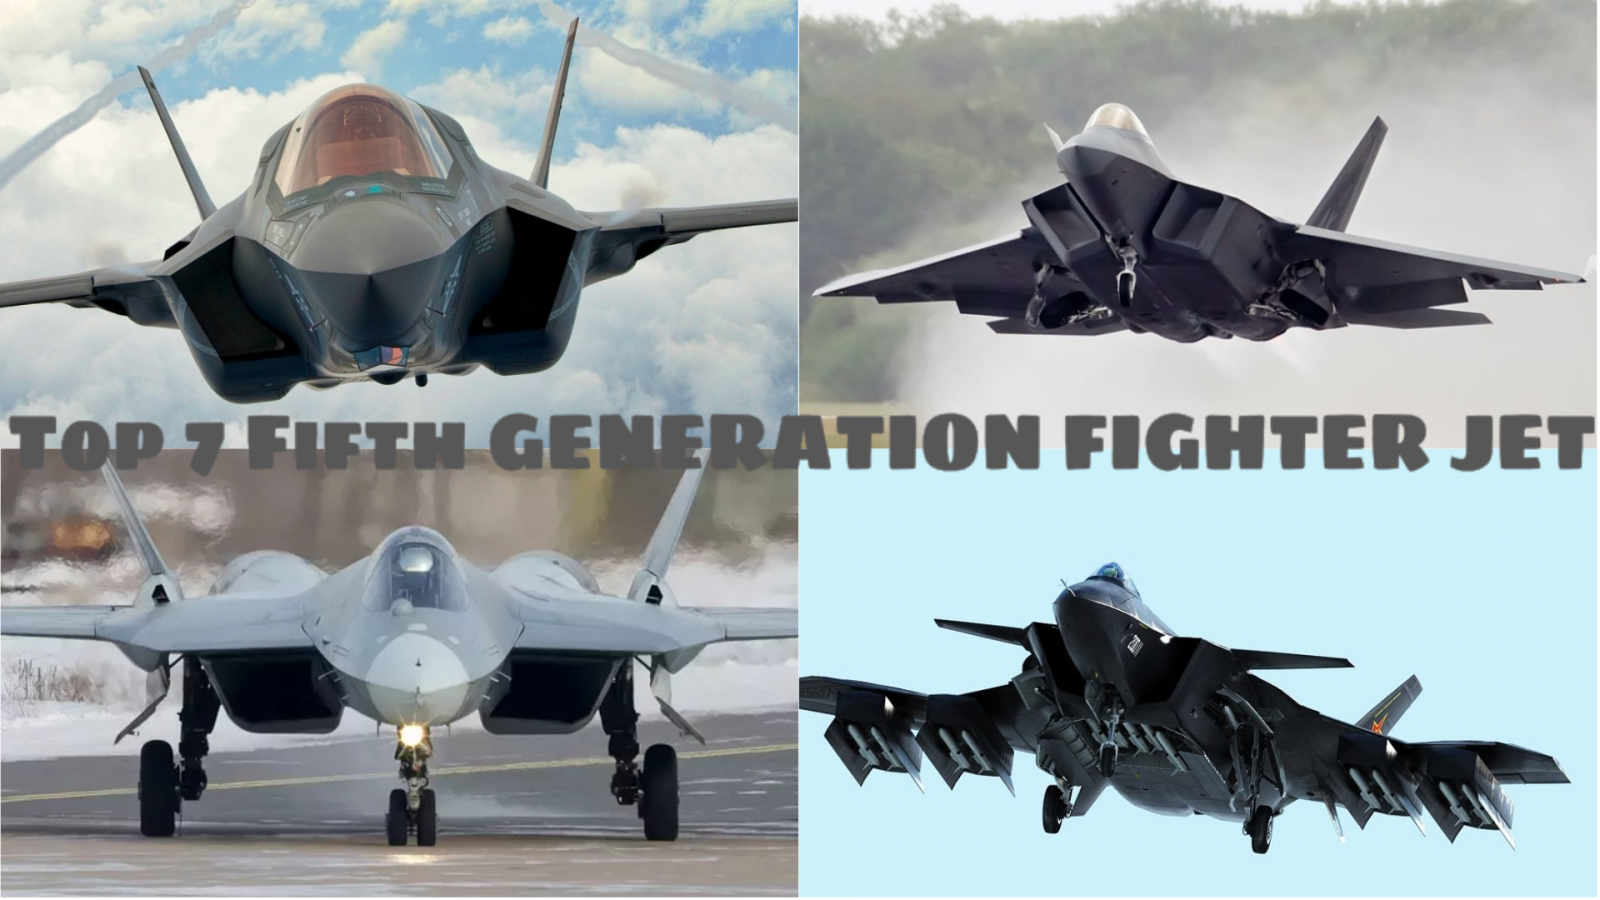 Top-7-FIFTH-GENERATION-FIGHTER-JET-2018.png